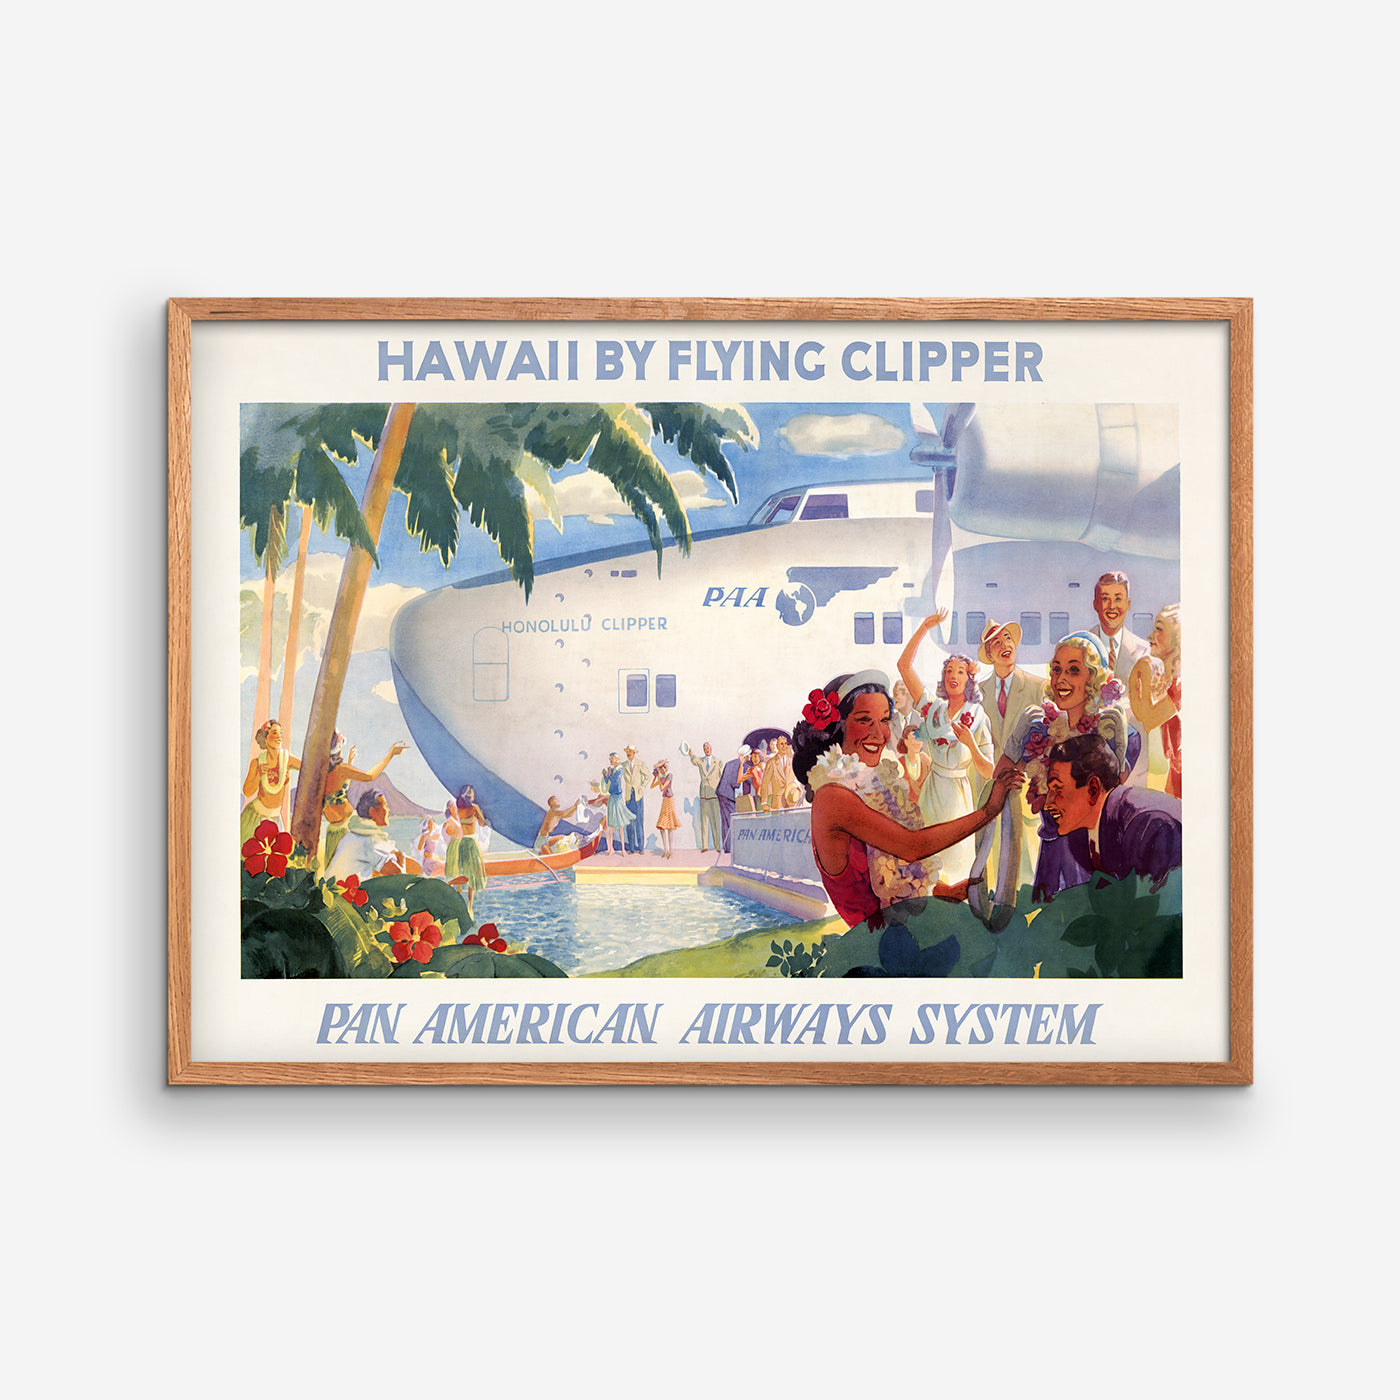 Hawaii by flying clipper--Pan American Airways System, 1938